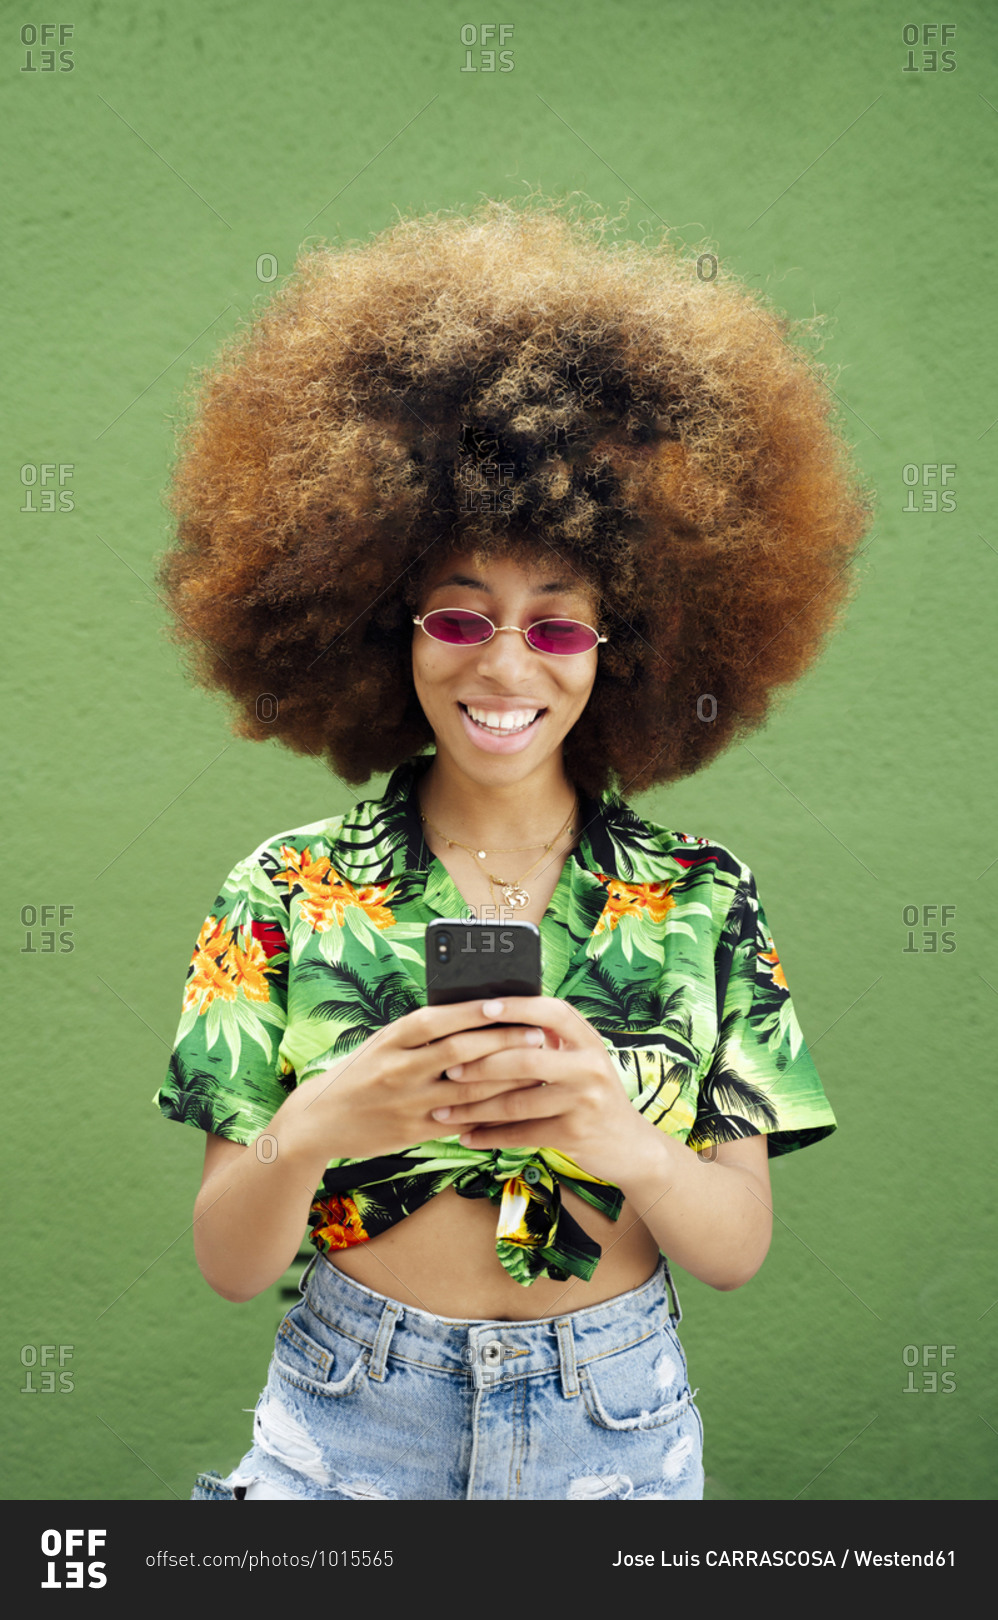 Smiling young woman using smartphone in front of green wall